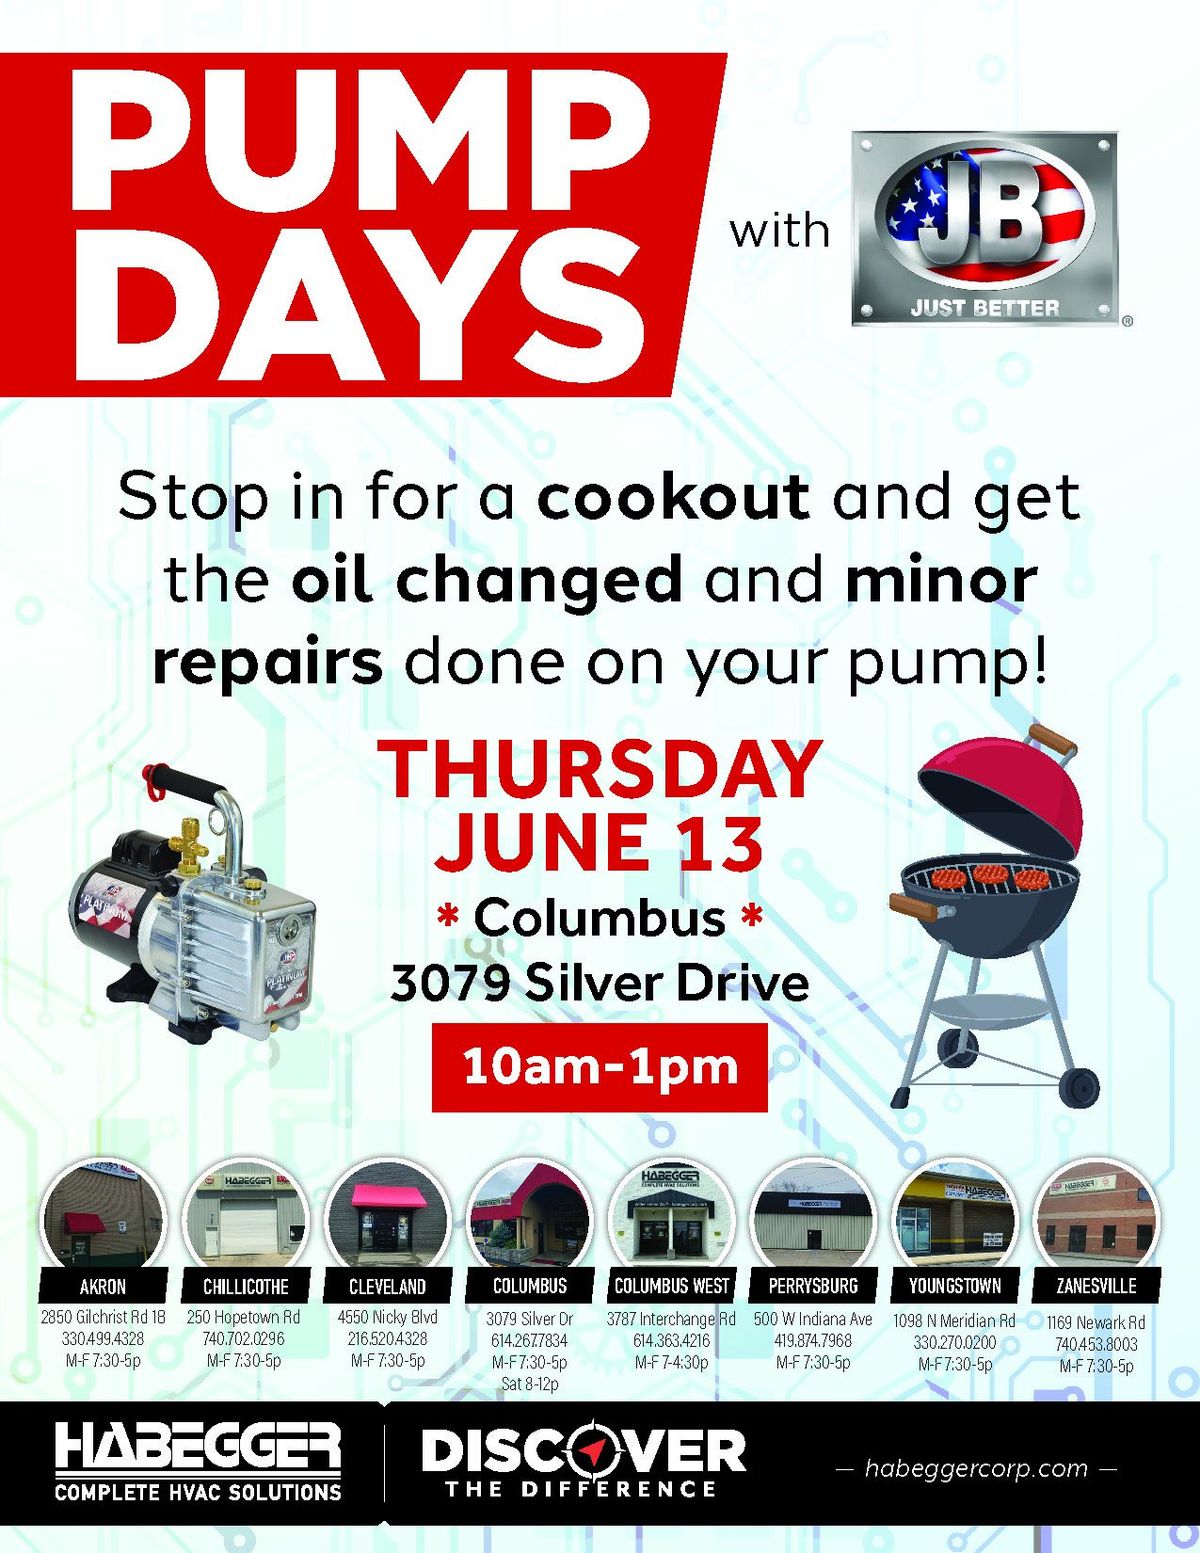 Pump Day & Cookout w\/ JB - Columbus Silver Dr.